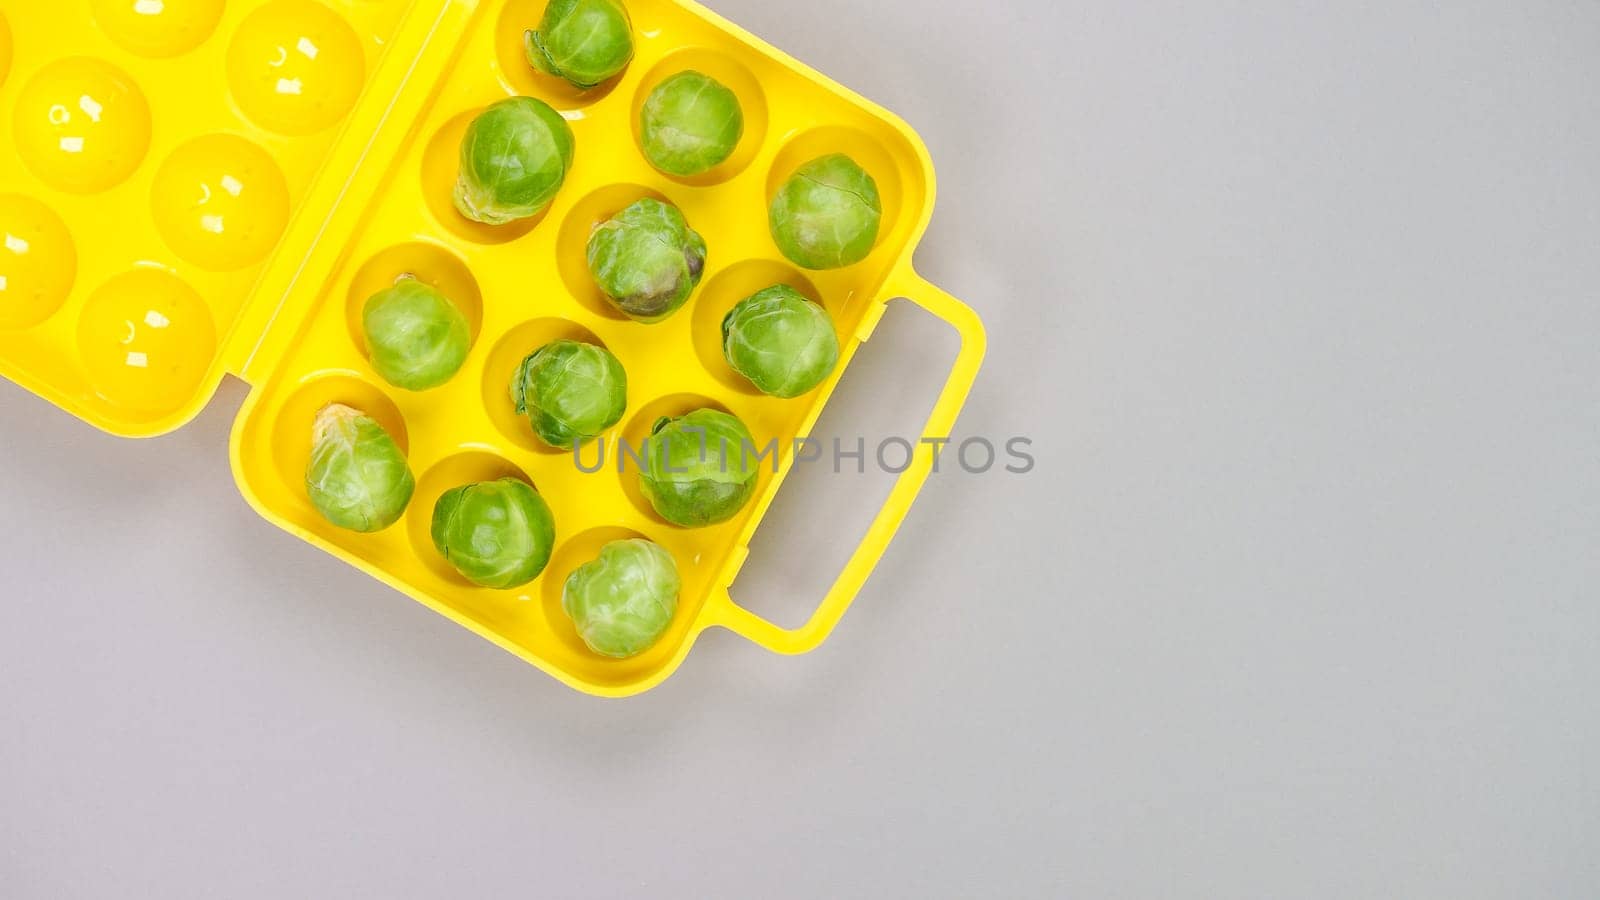 Raw organic Brussel sprouts in yellow container on grey background, top view. Flat lay, overhead, from above. Copy space